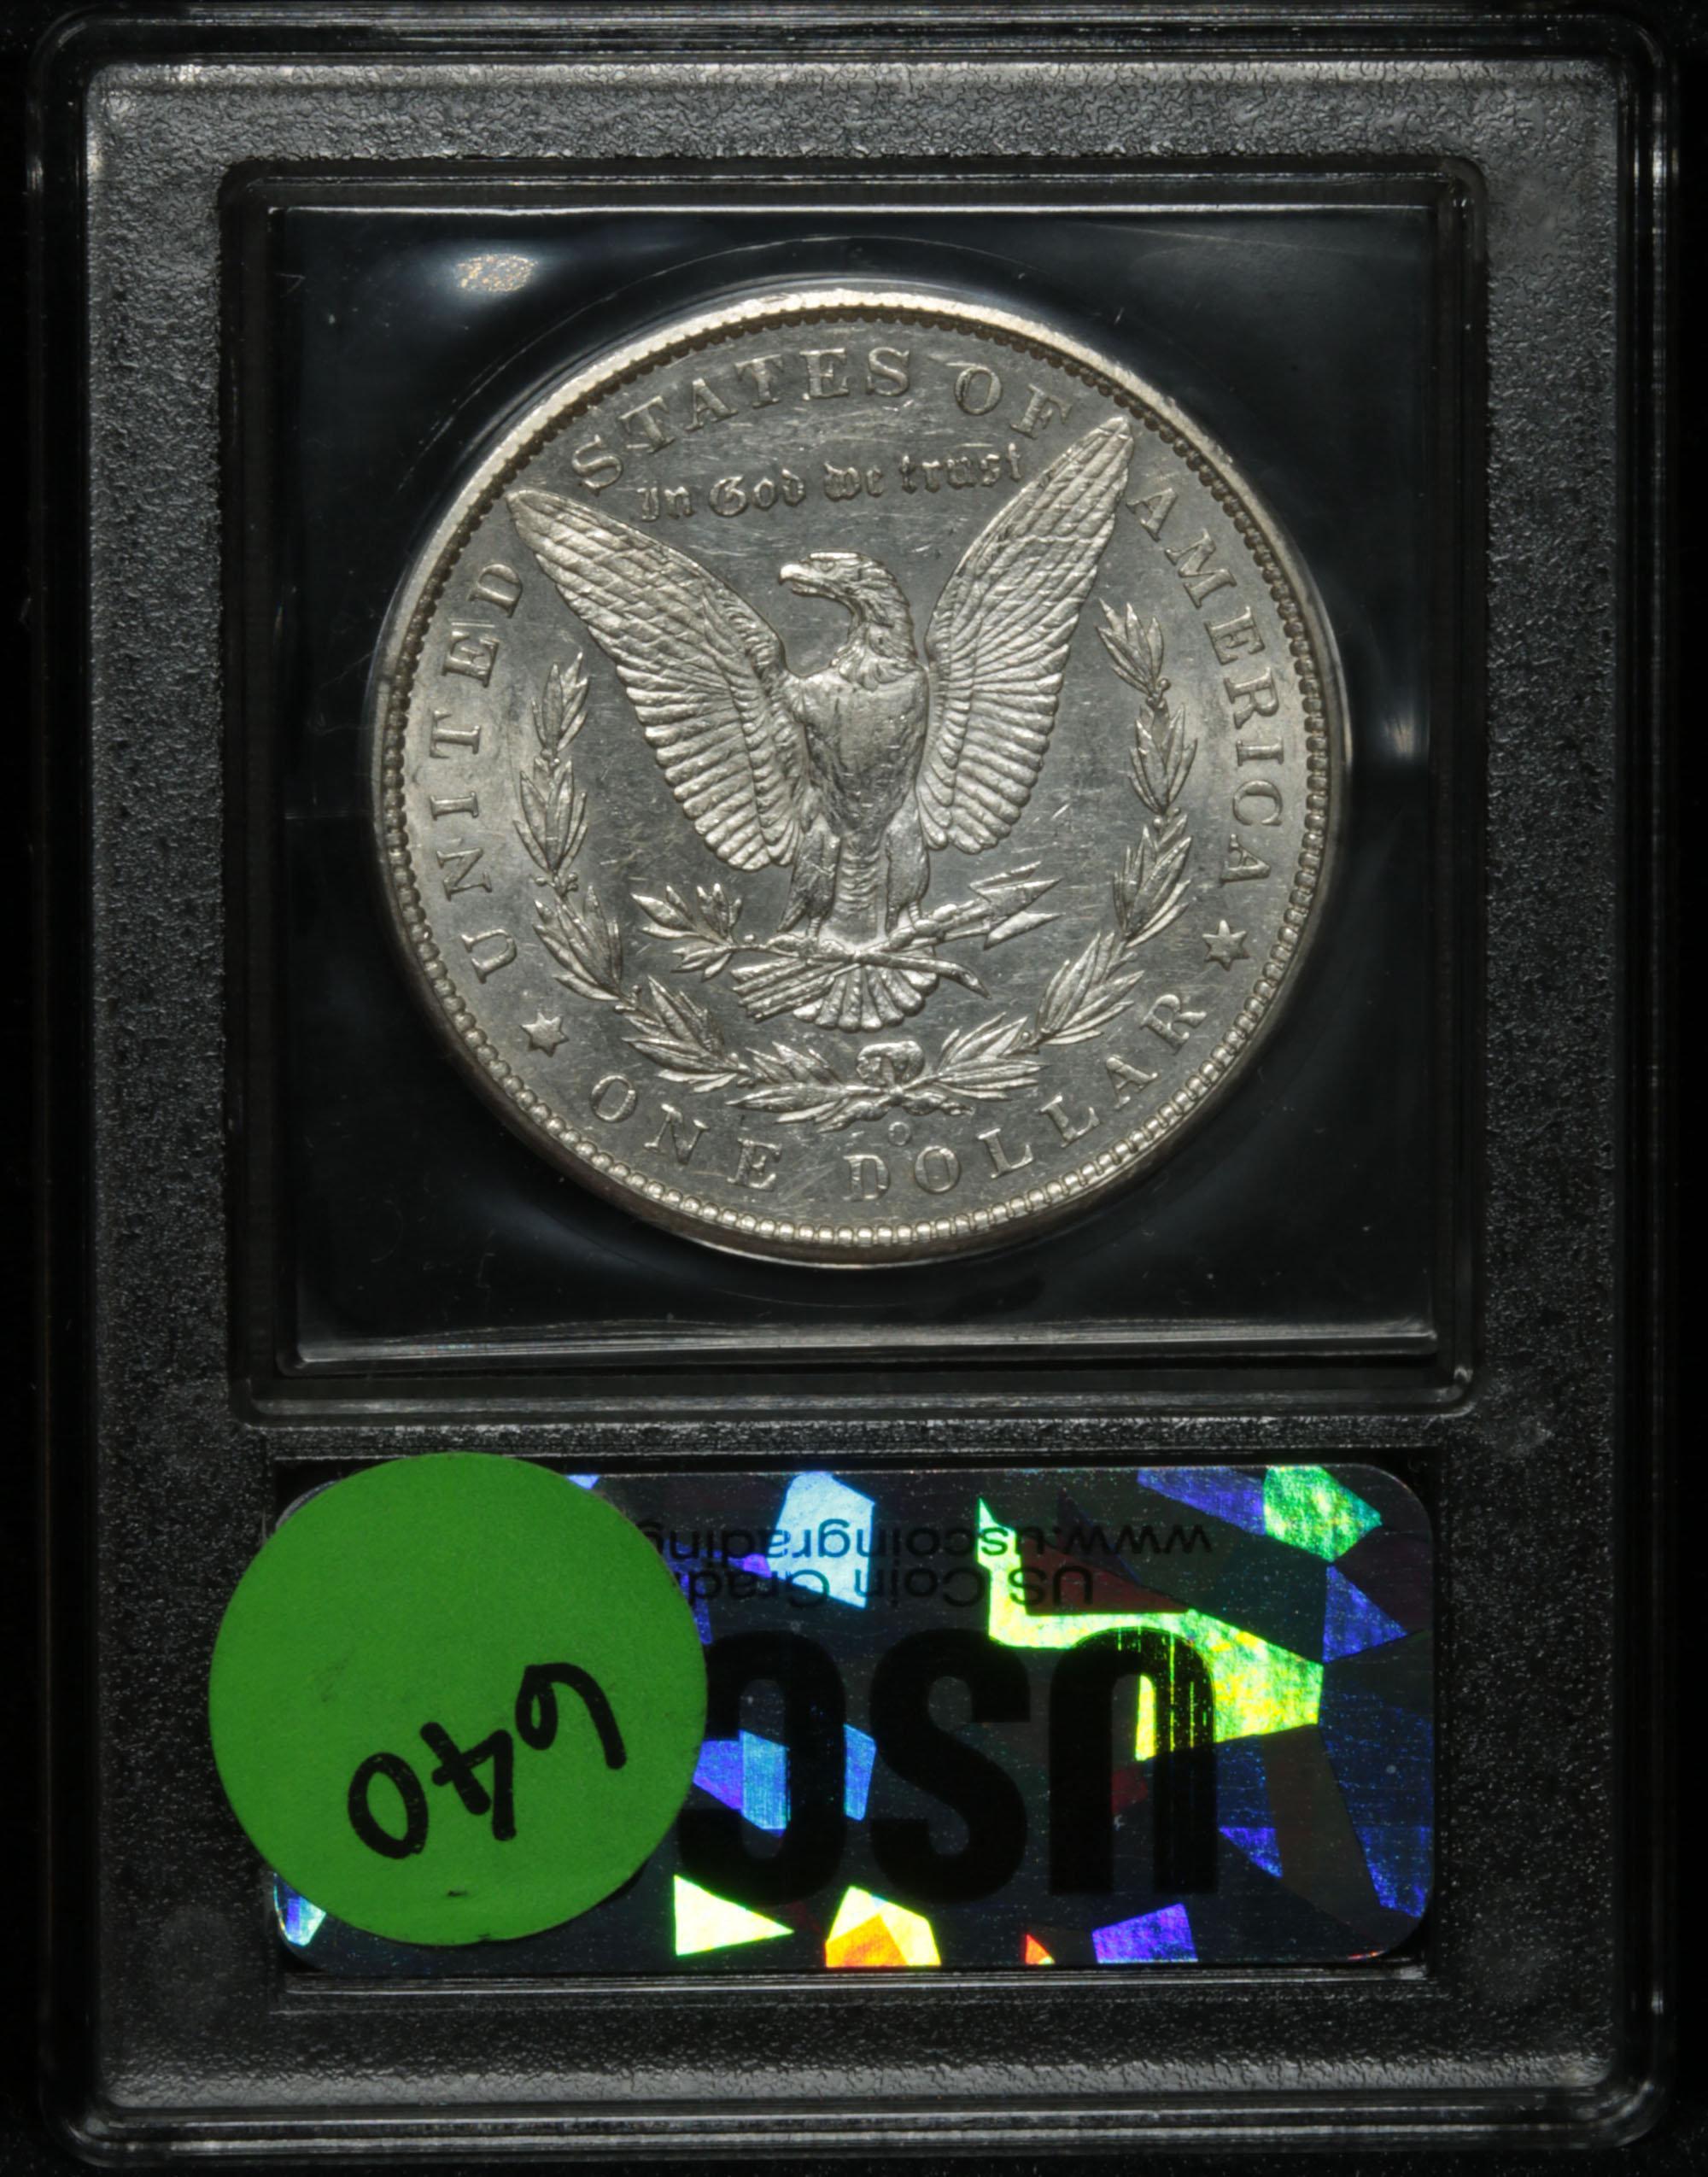 ***Auction Highlight*** Key Date 1886-o Morgan Dollar $1 Graded Select Unc by USCG (fc)